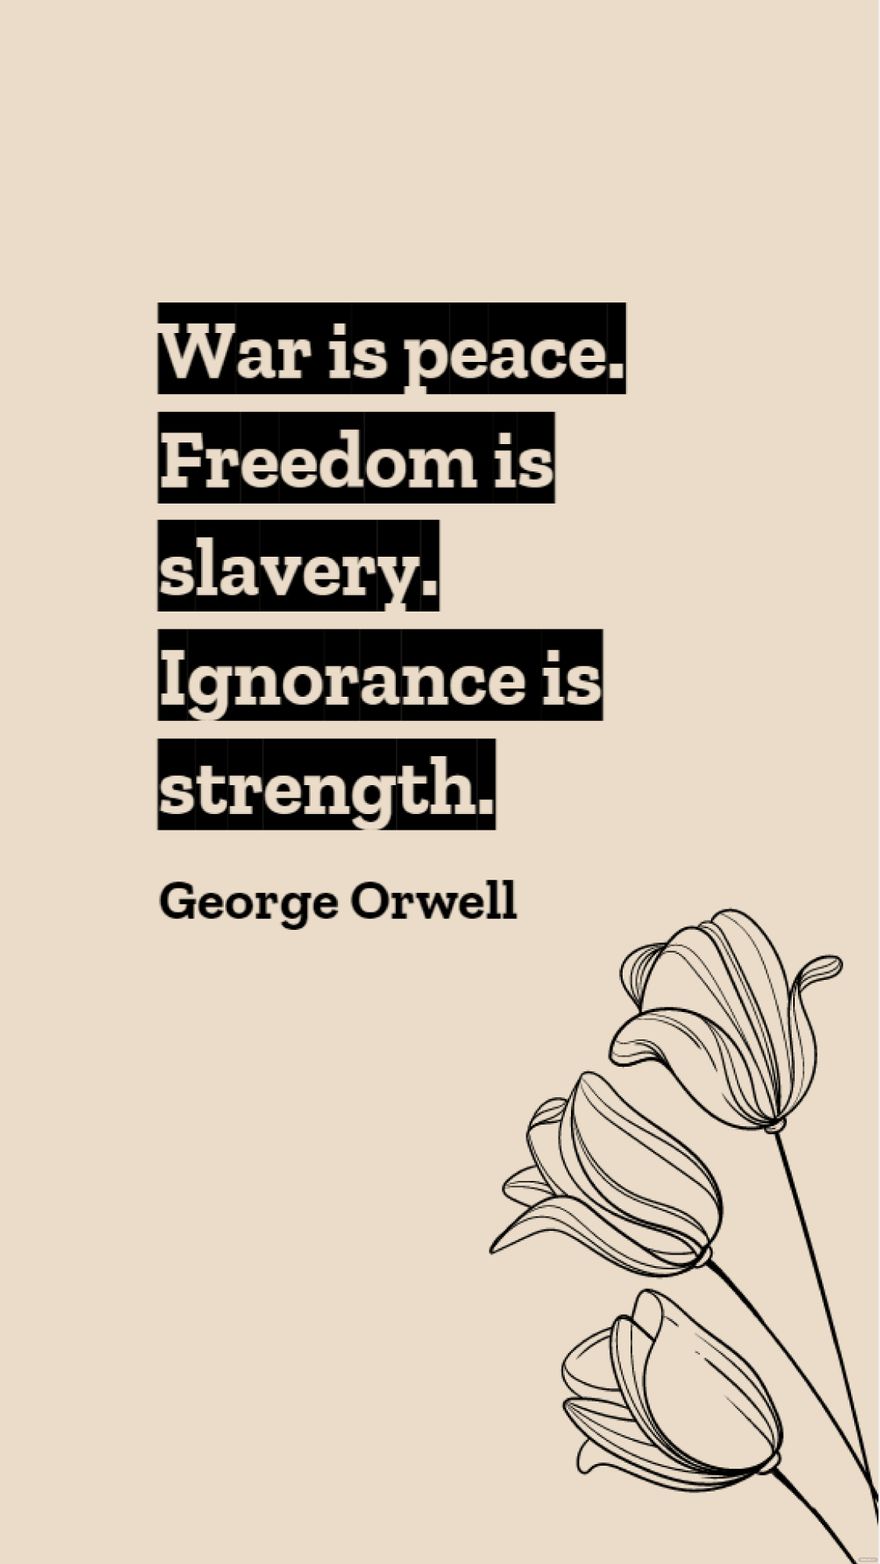 George Orwell - War is peace. Freedom is slavery. Ignorance is strength.